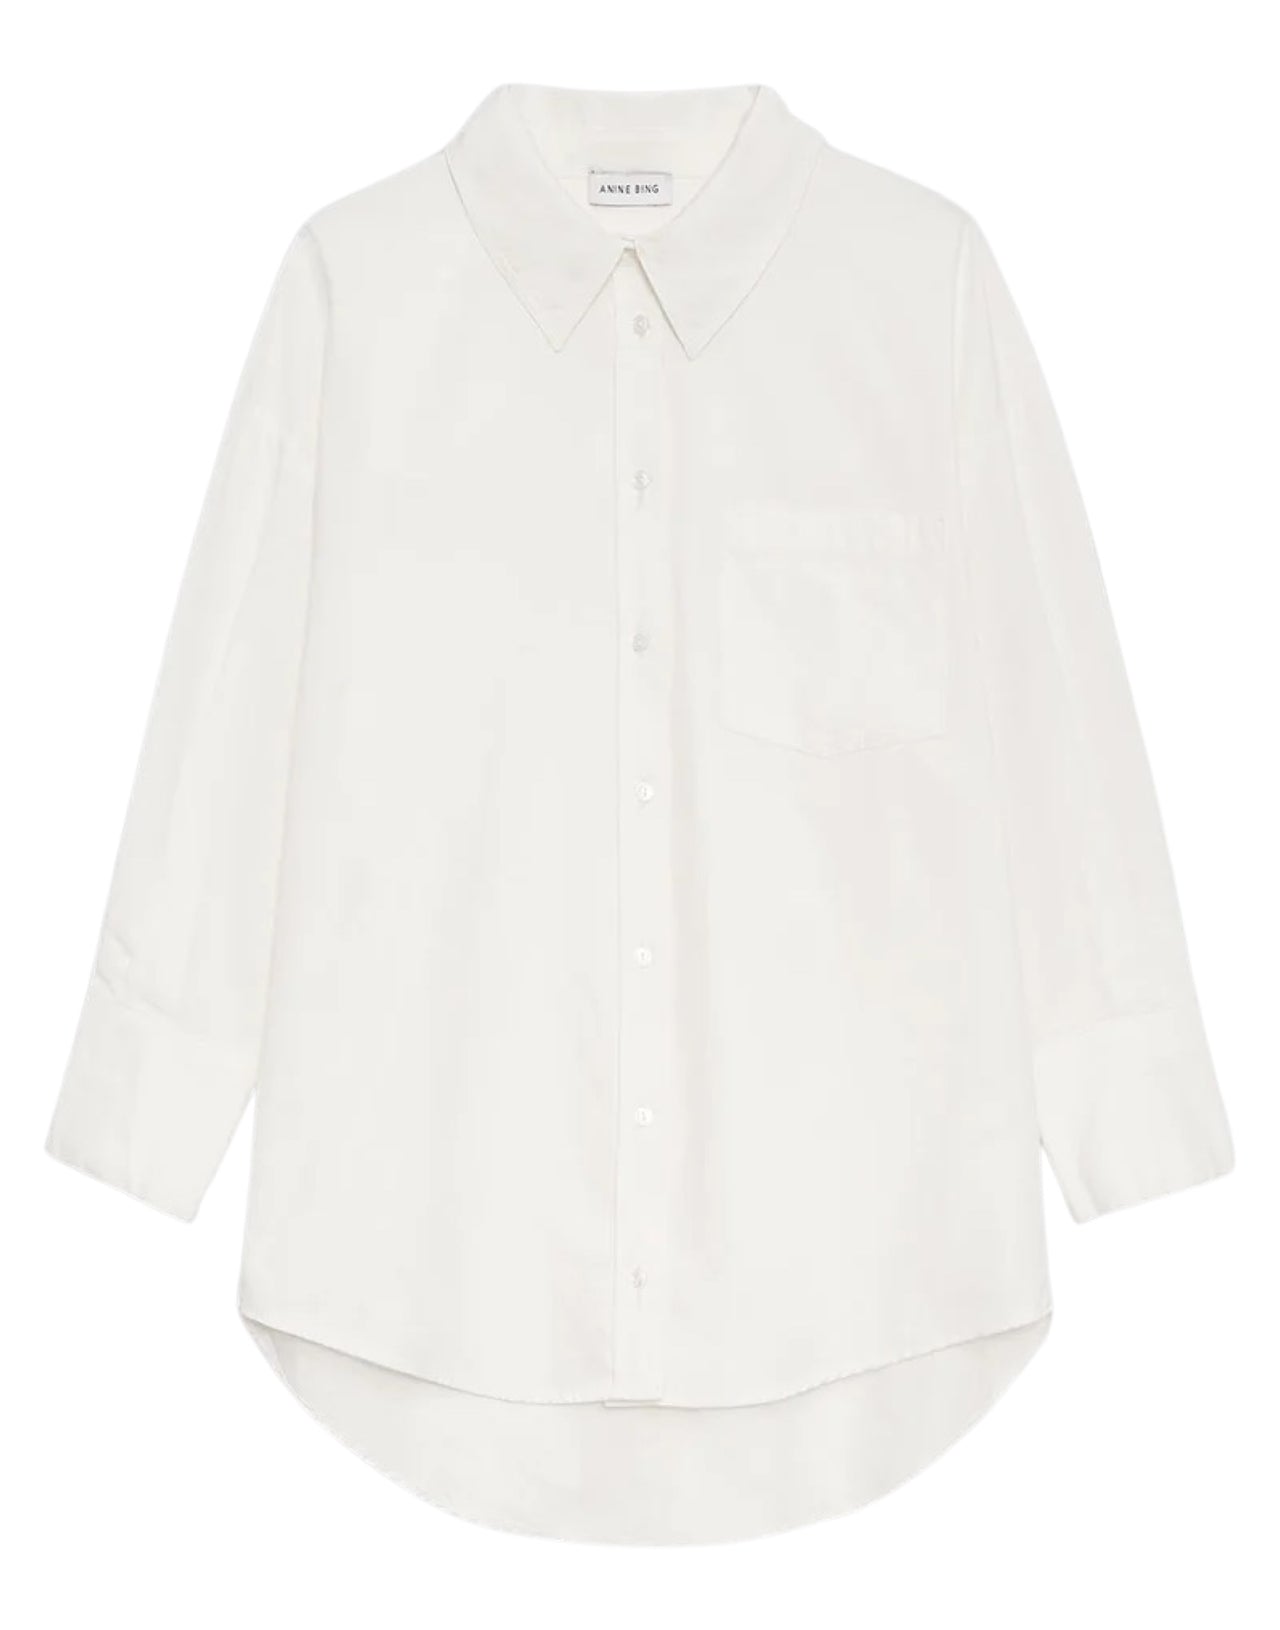 ANINE BING L.A. MIKA SHIRT IN WHITE